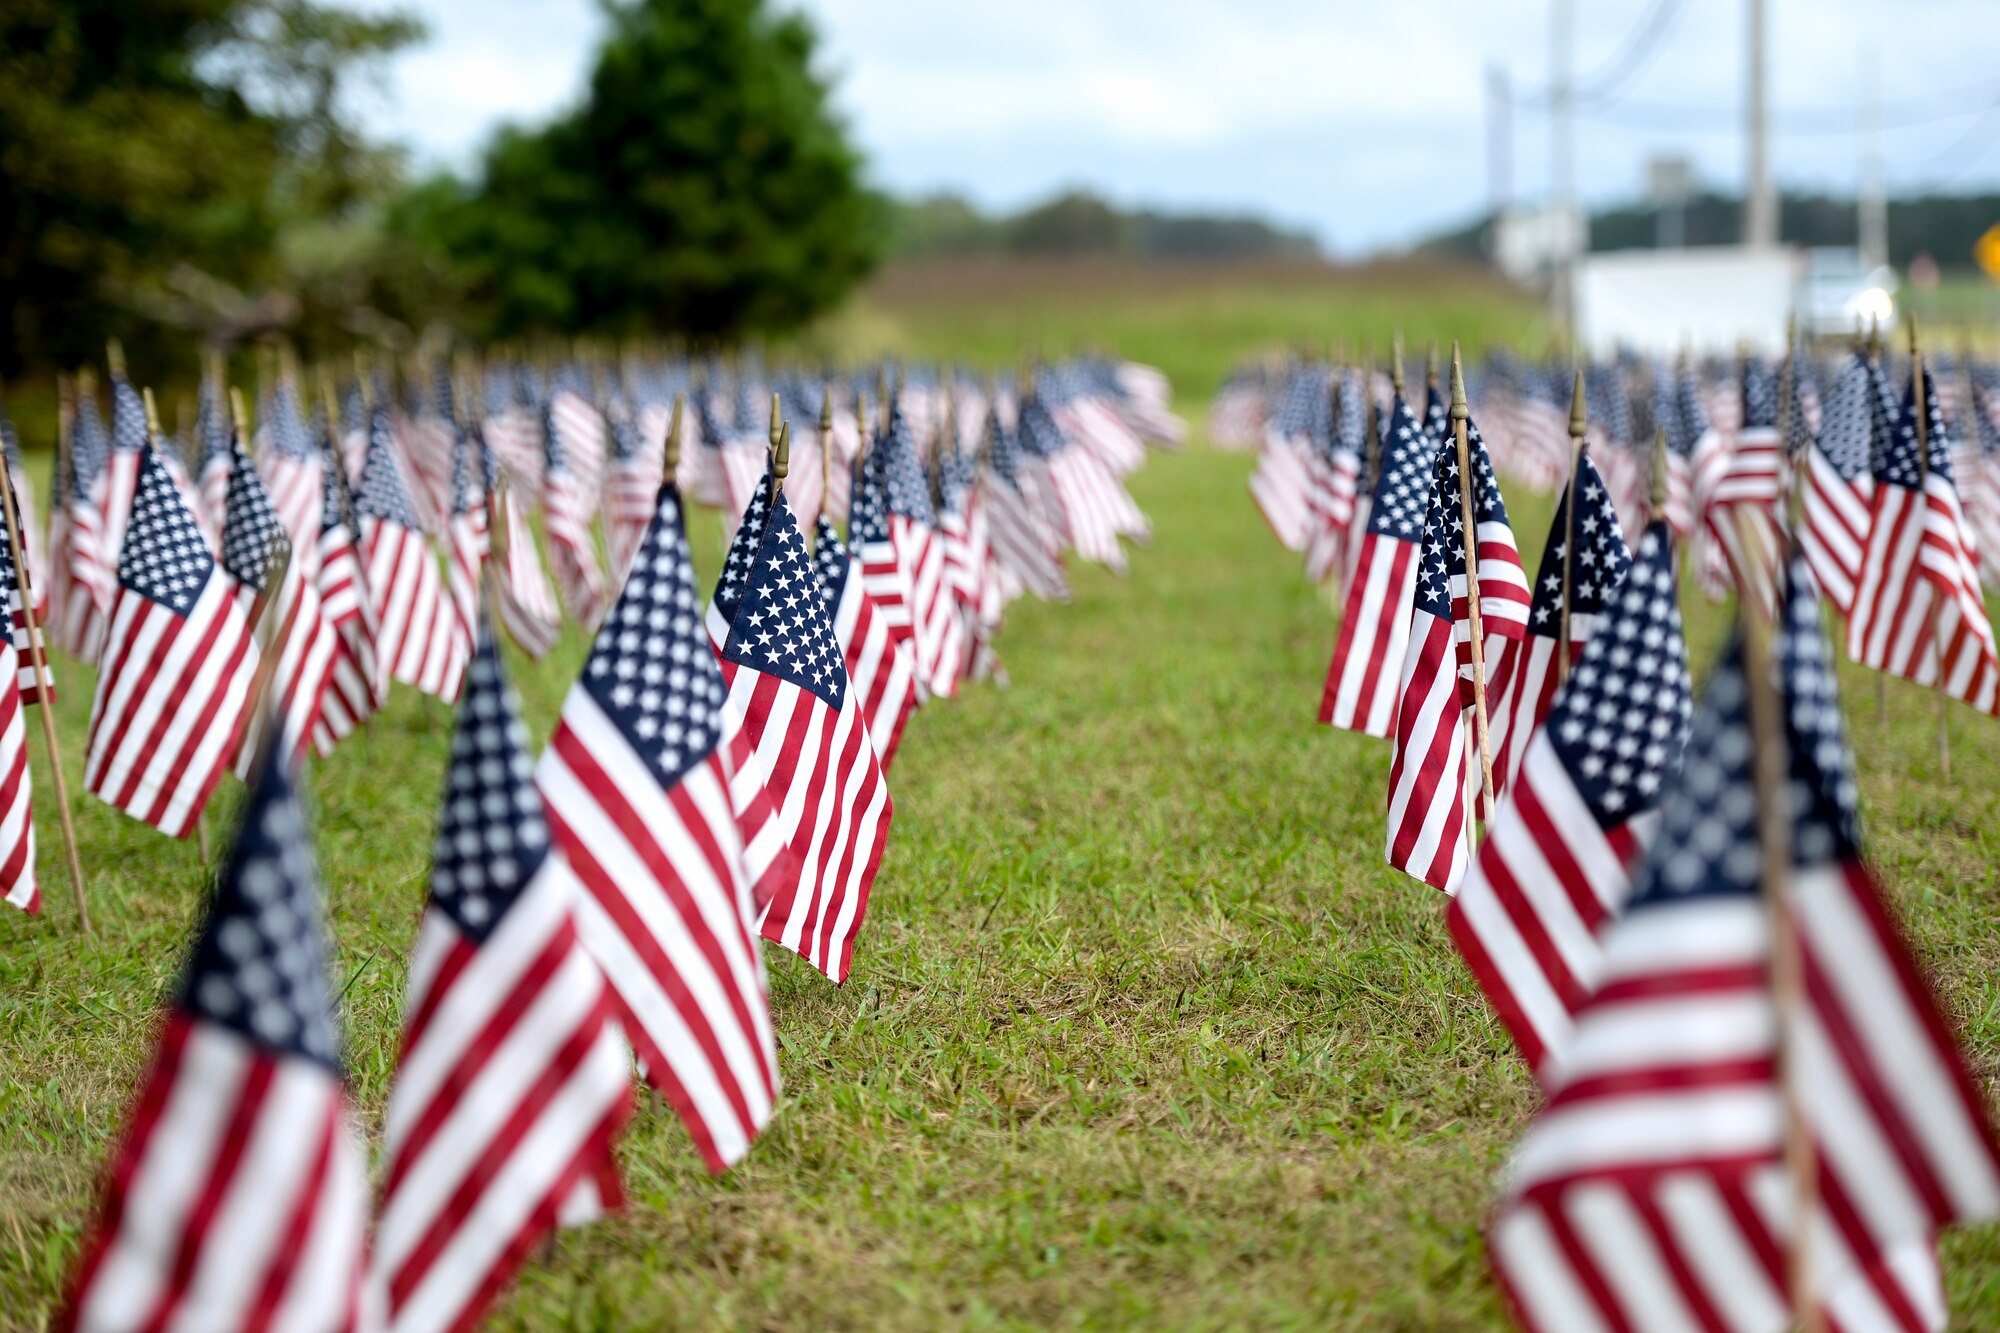 A photo of American flags placed in the ground.